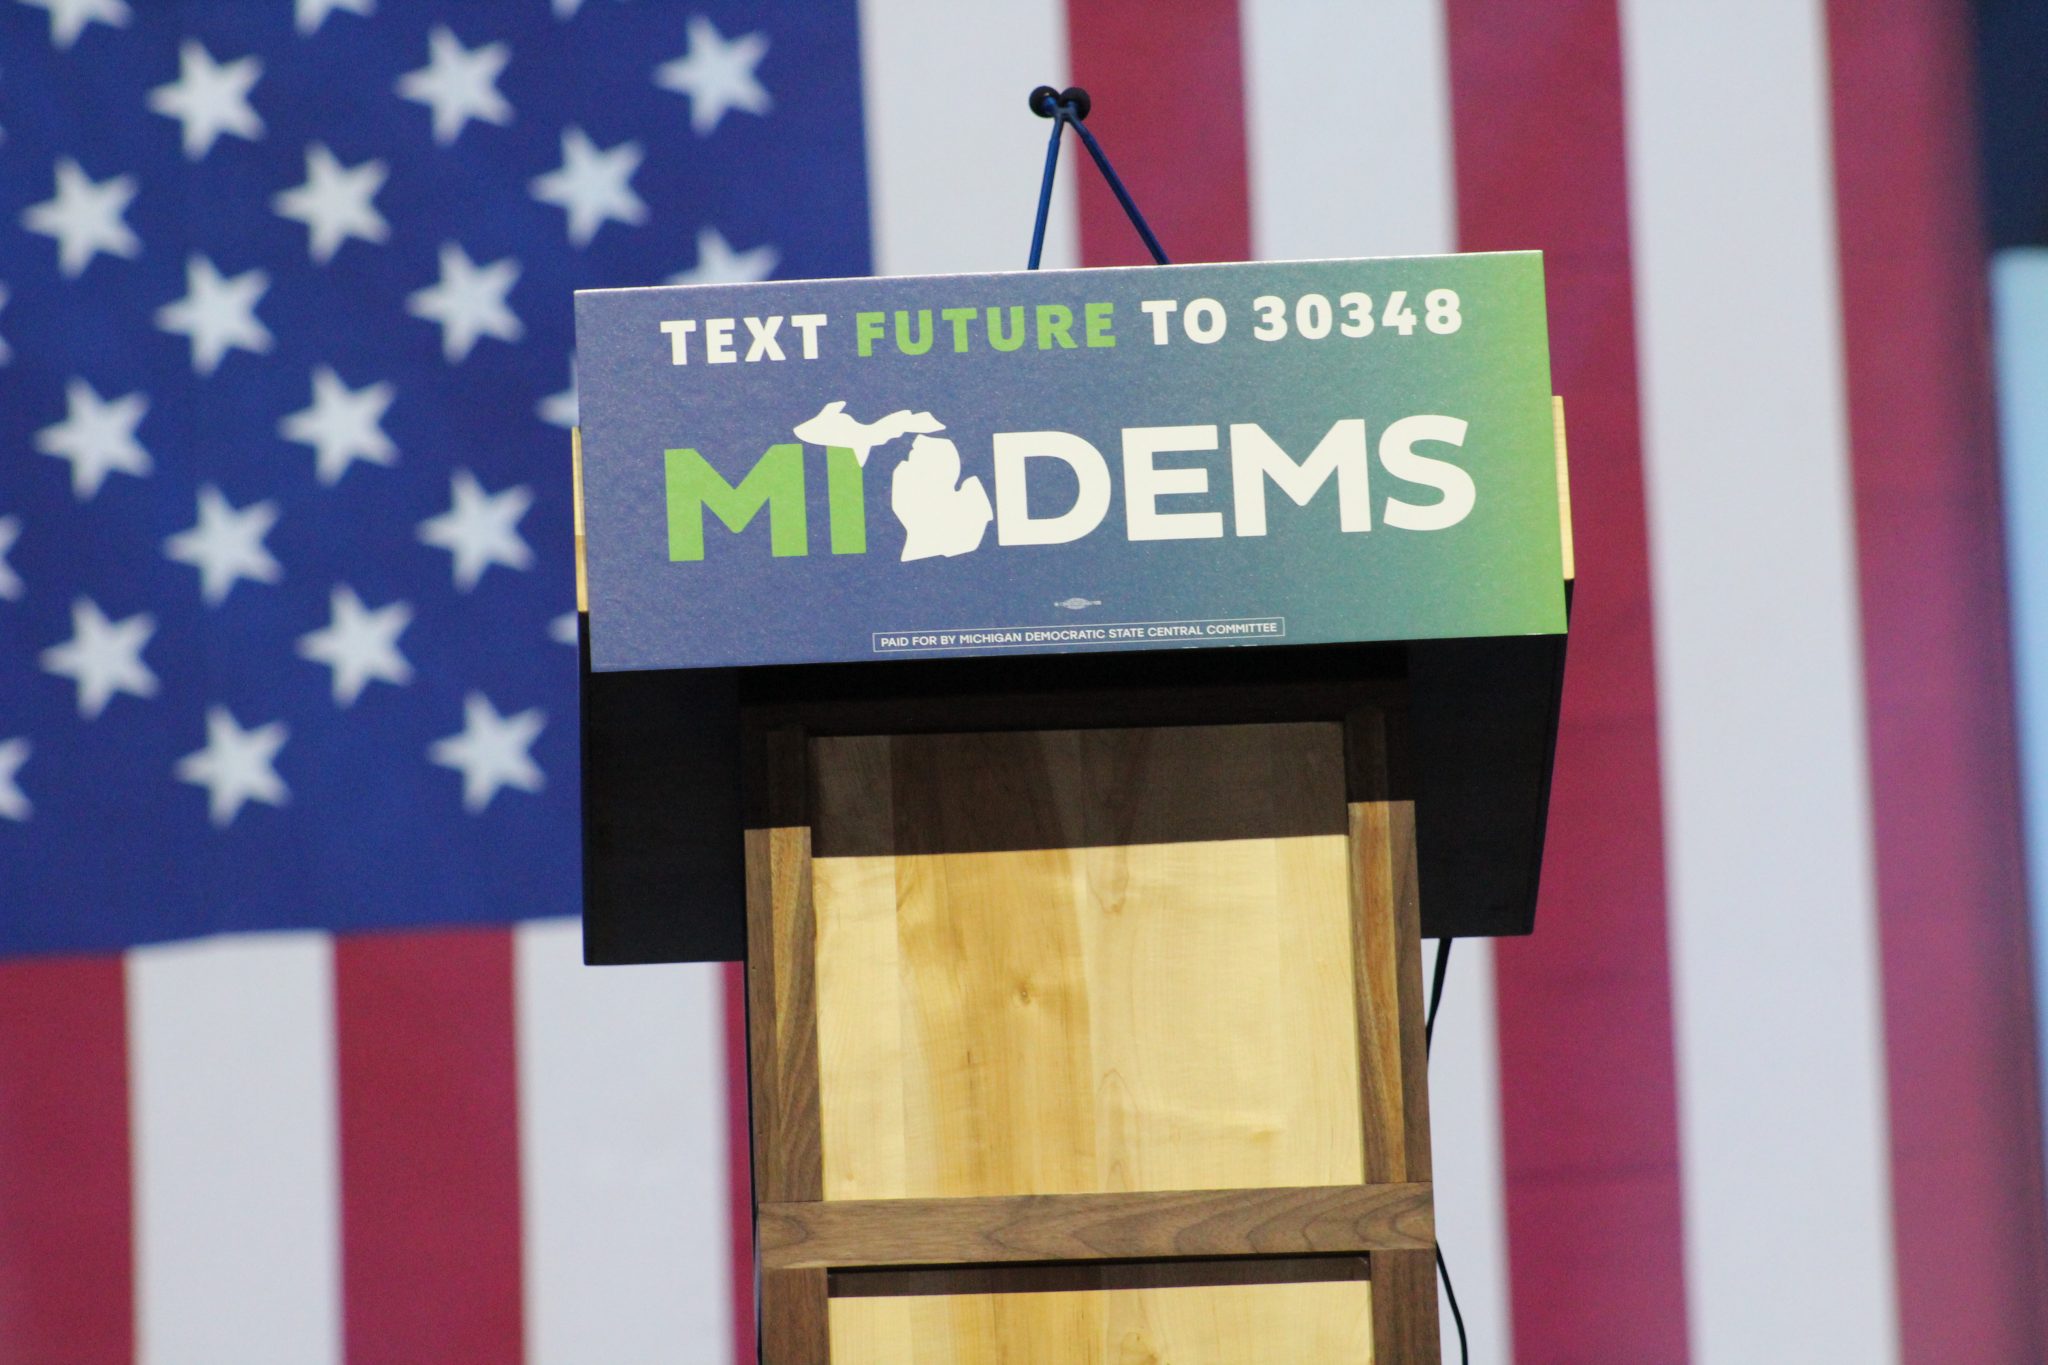 podium that reads "MI Dems" in front of an American flag